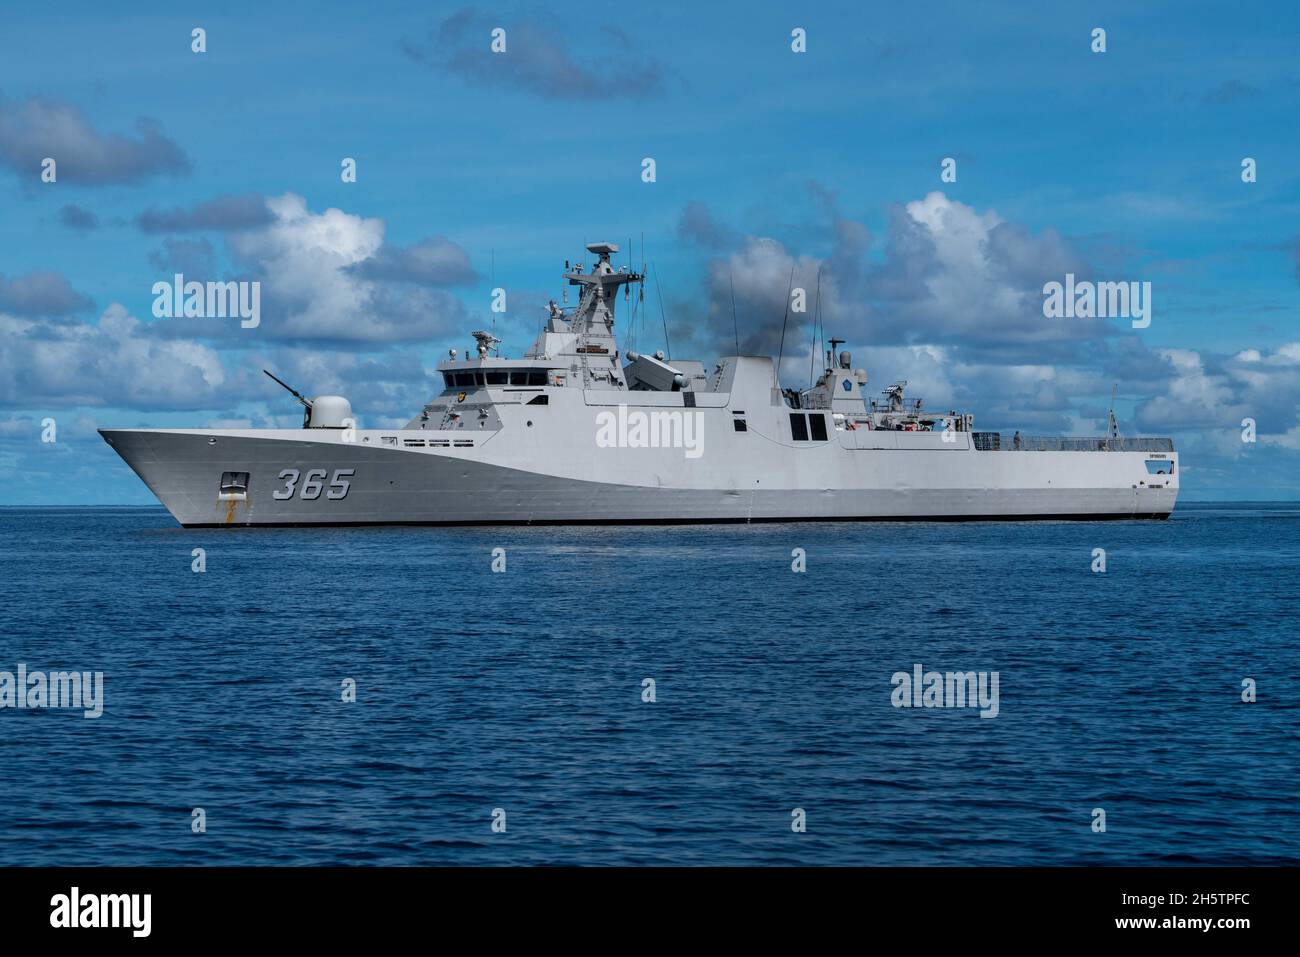 Java Sea, Indonesia. 09 November, 2021. The Indonesian Navy Diponegoro-class corvette KRI Diponegoro, sails alongside the Independence-variant littoral combat ship USS Jackson during Cooperation Afloat and Readiness and Training November 9, 2021in the Java Sea.  Credit: MC3 Andrew Langholf/Planetpix/Alamy Live News Stock Photo